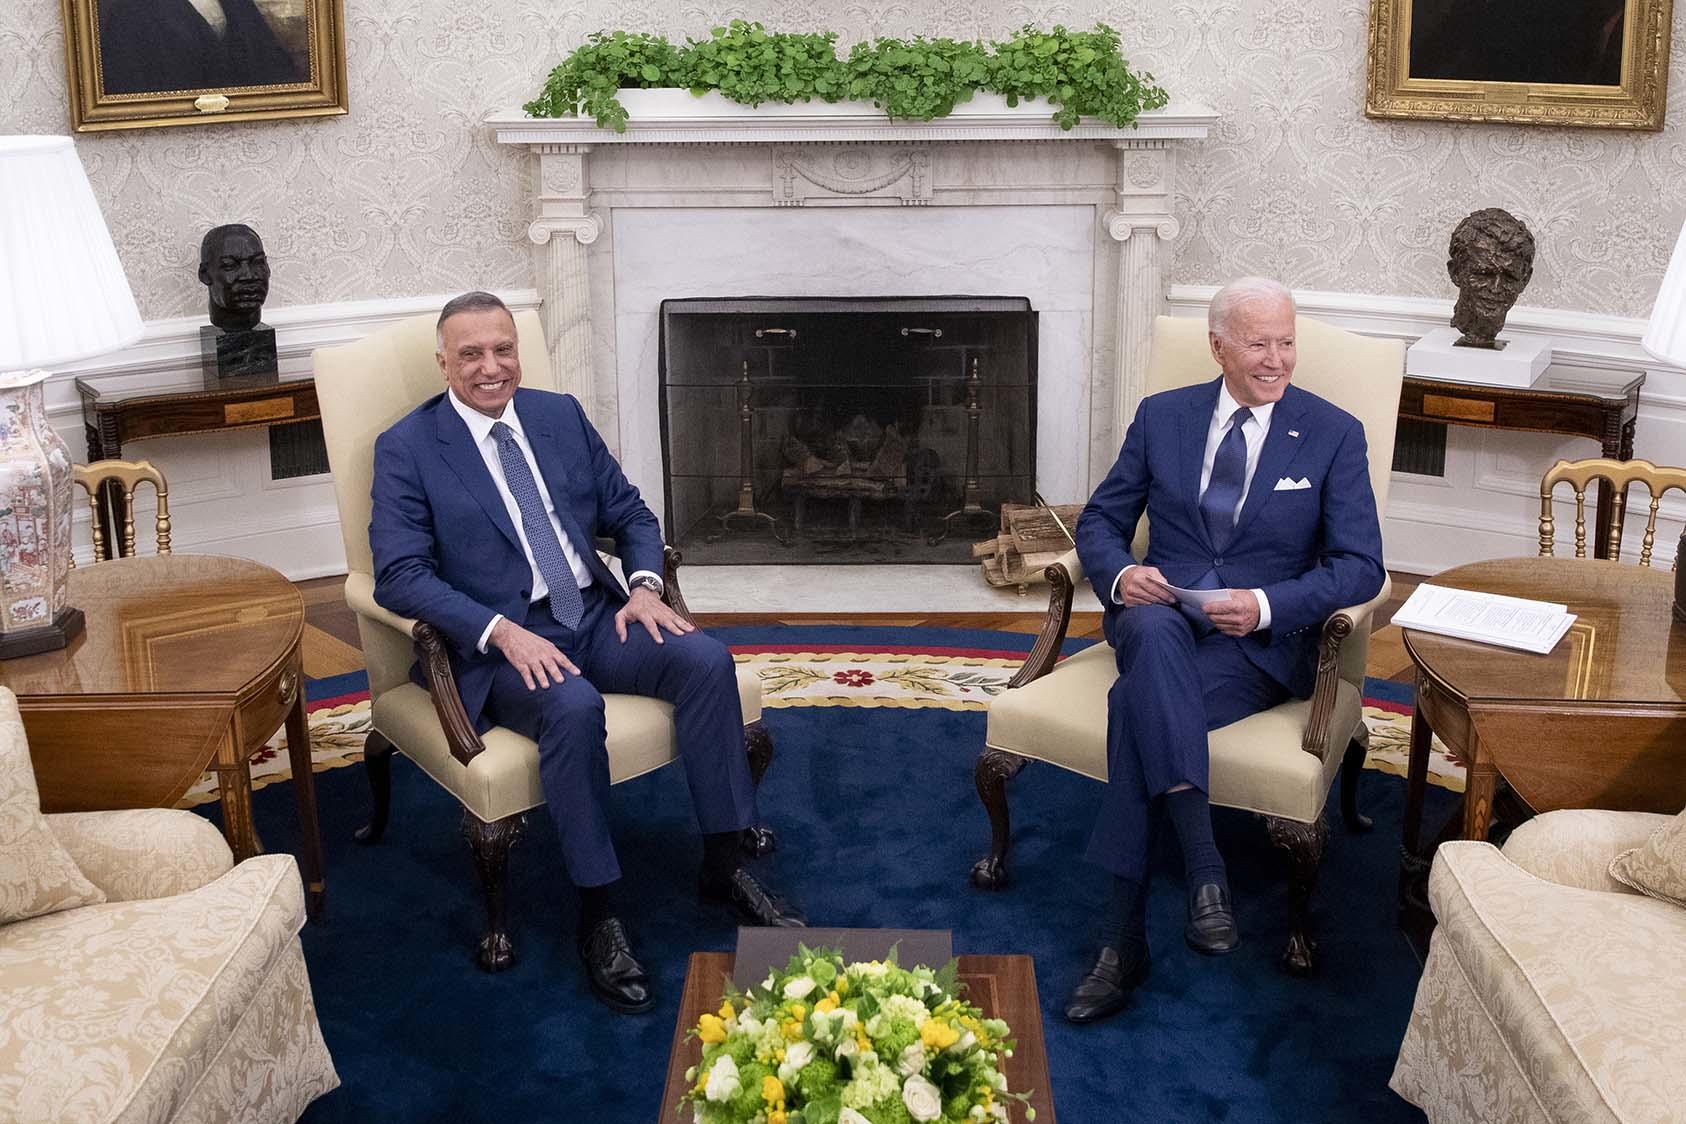 President Joe Biden meets with Iraqi Prime Minister Mustafa al-Kadhimi, left, in the Oval Office of the White House in Washington, on Monday, July 26, 2021. (Tom Brenner/The New York Times)